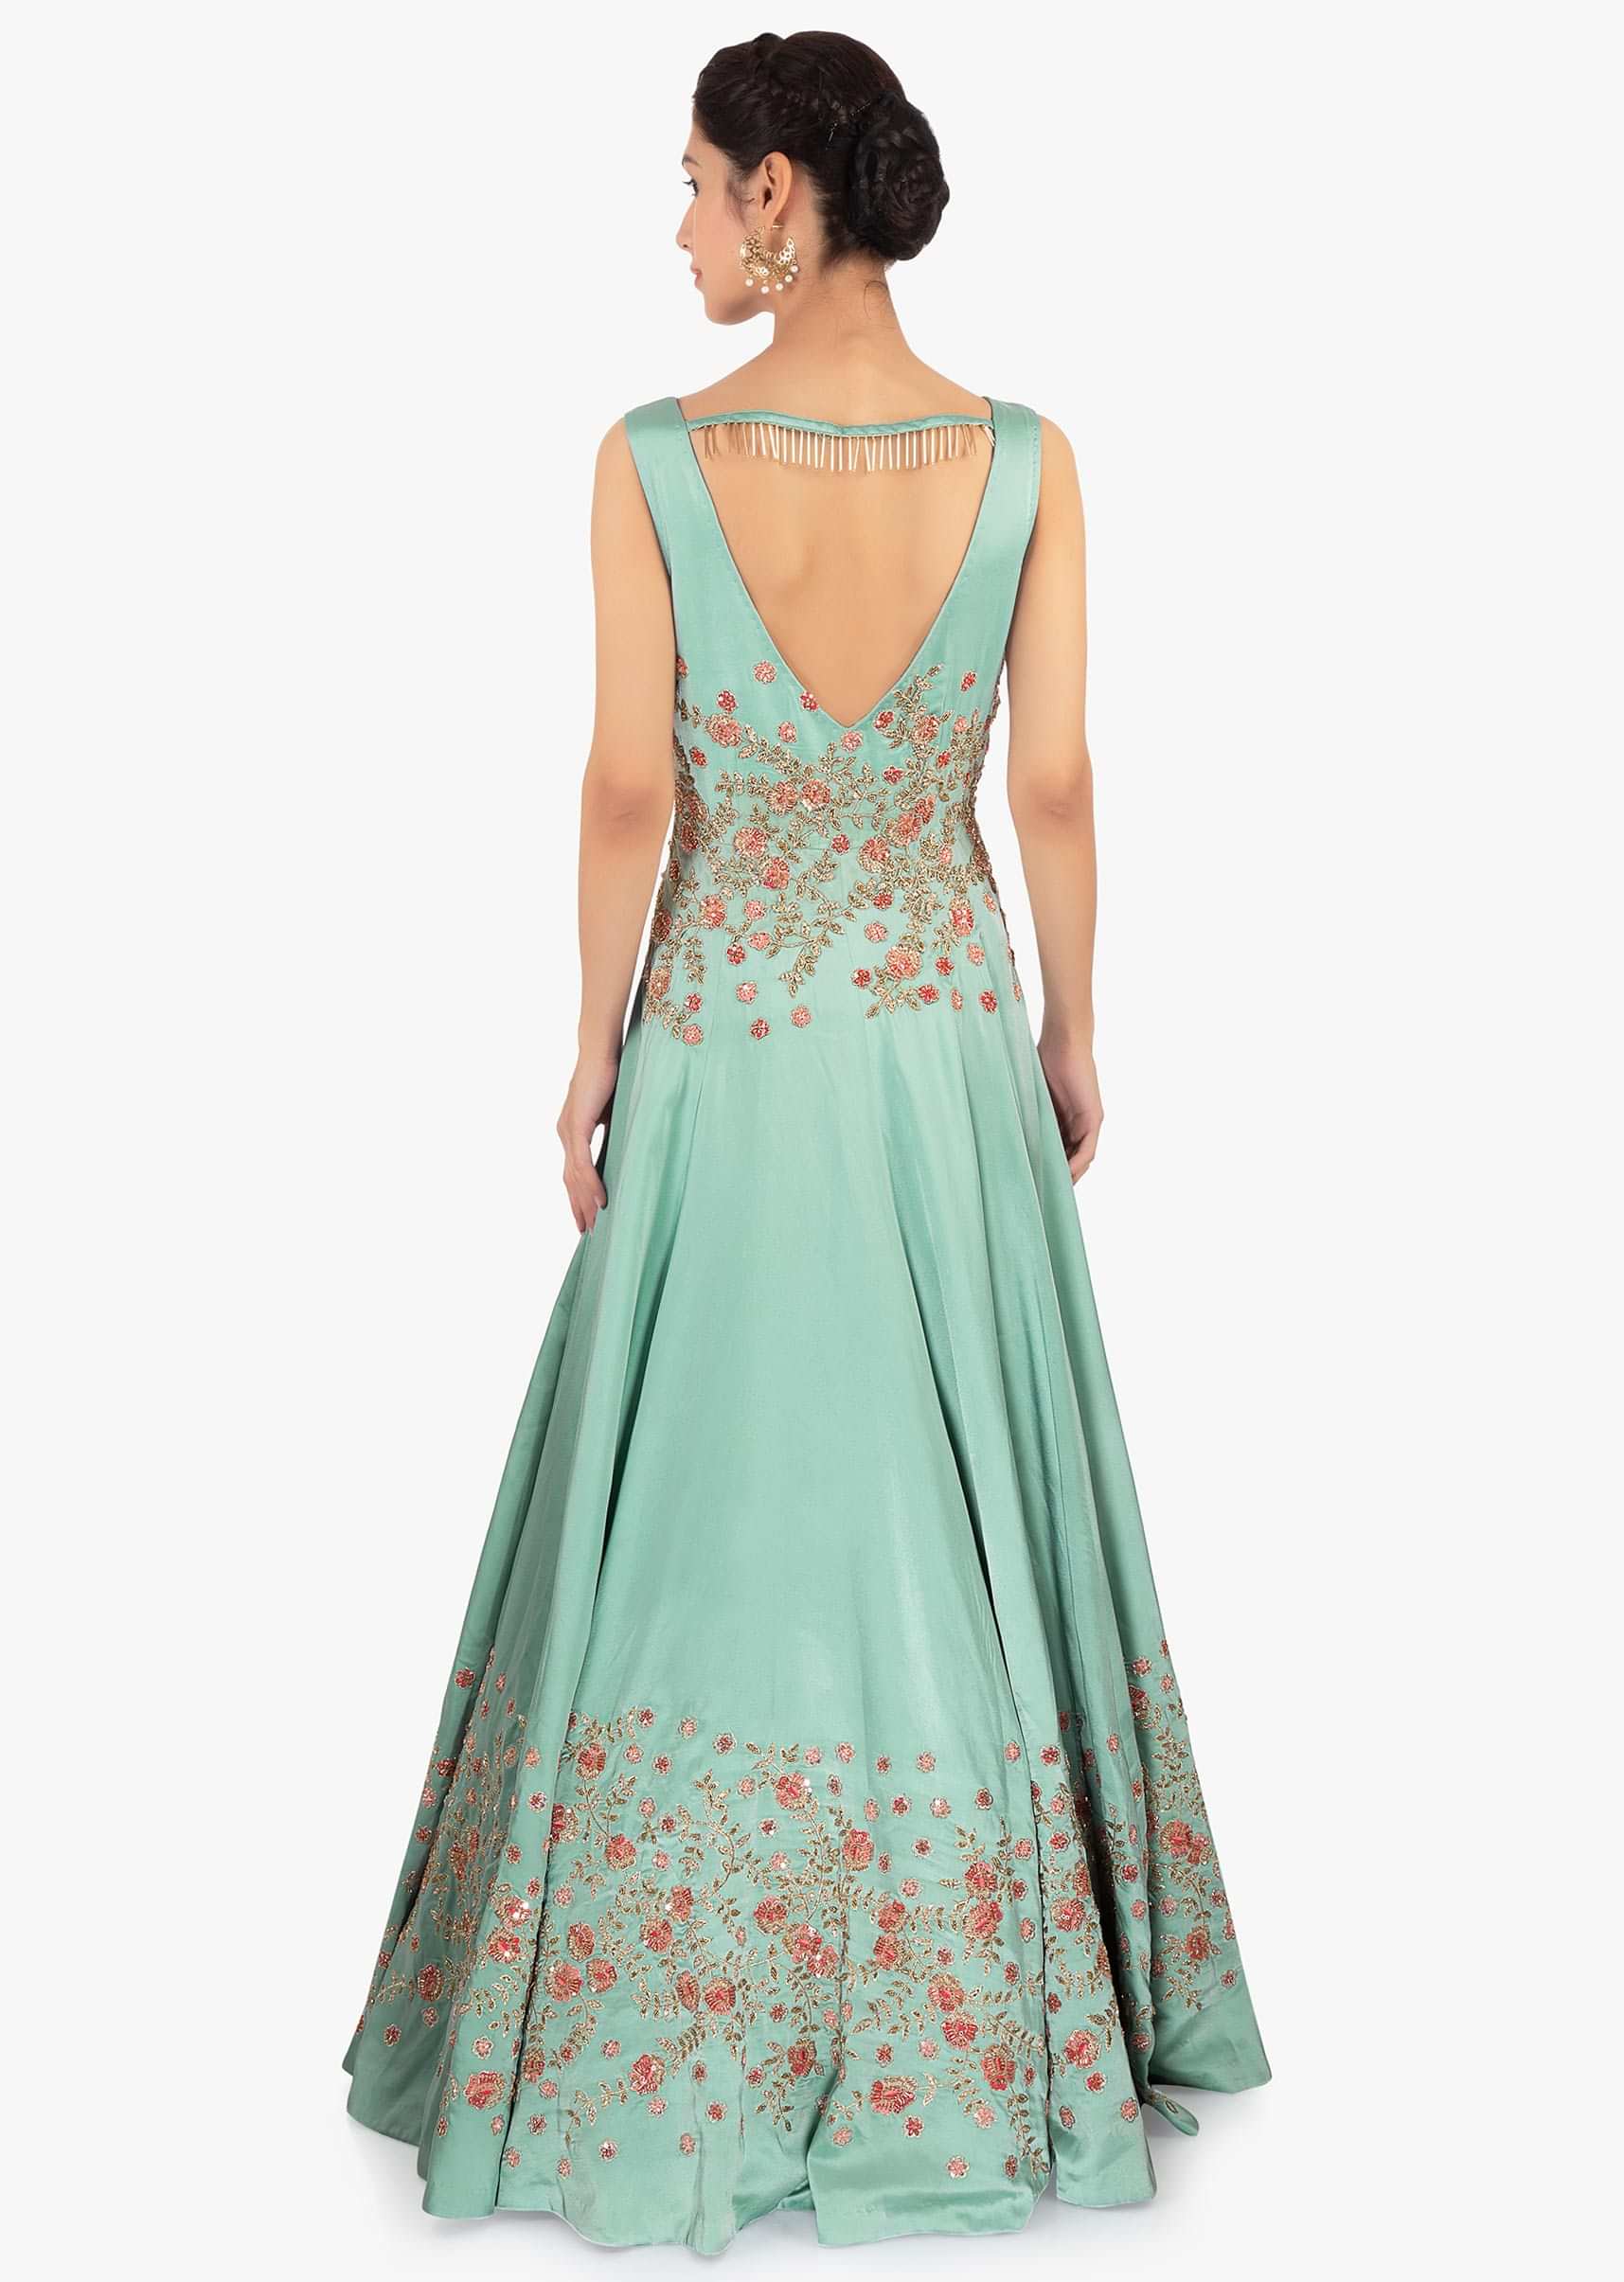 Tiffany blue satin gown in zari and resham floral embroidery